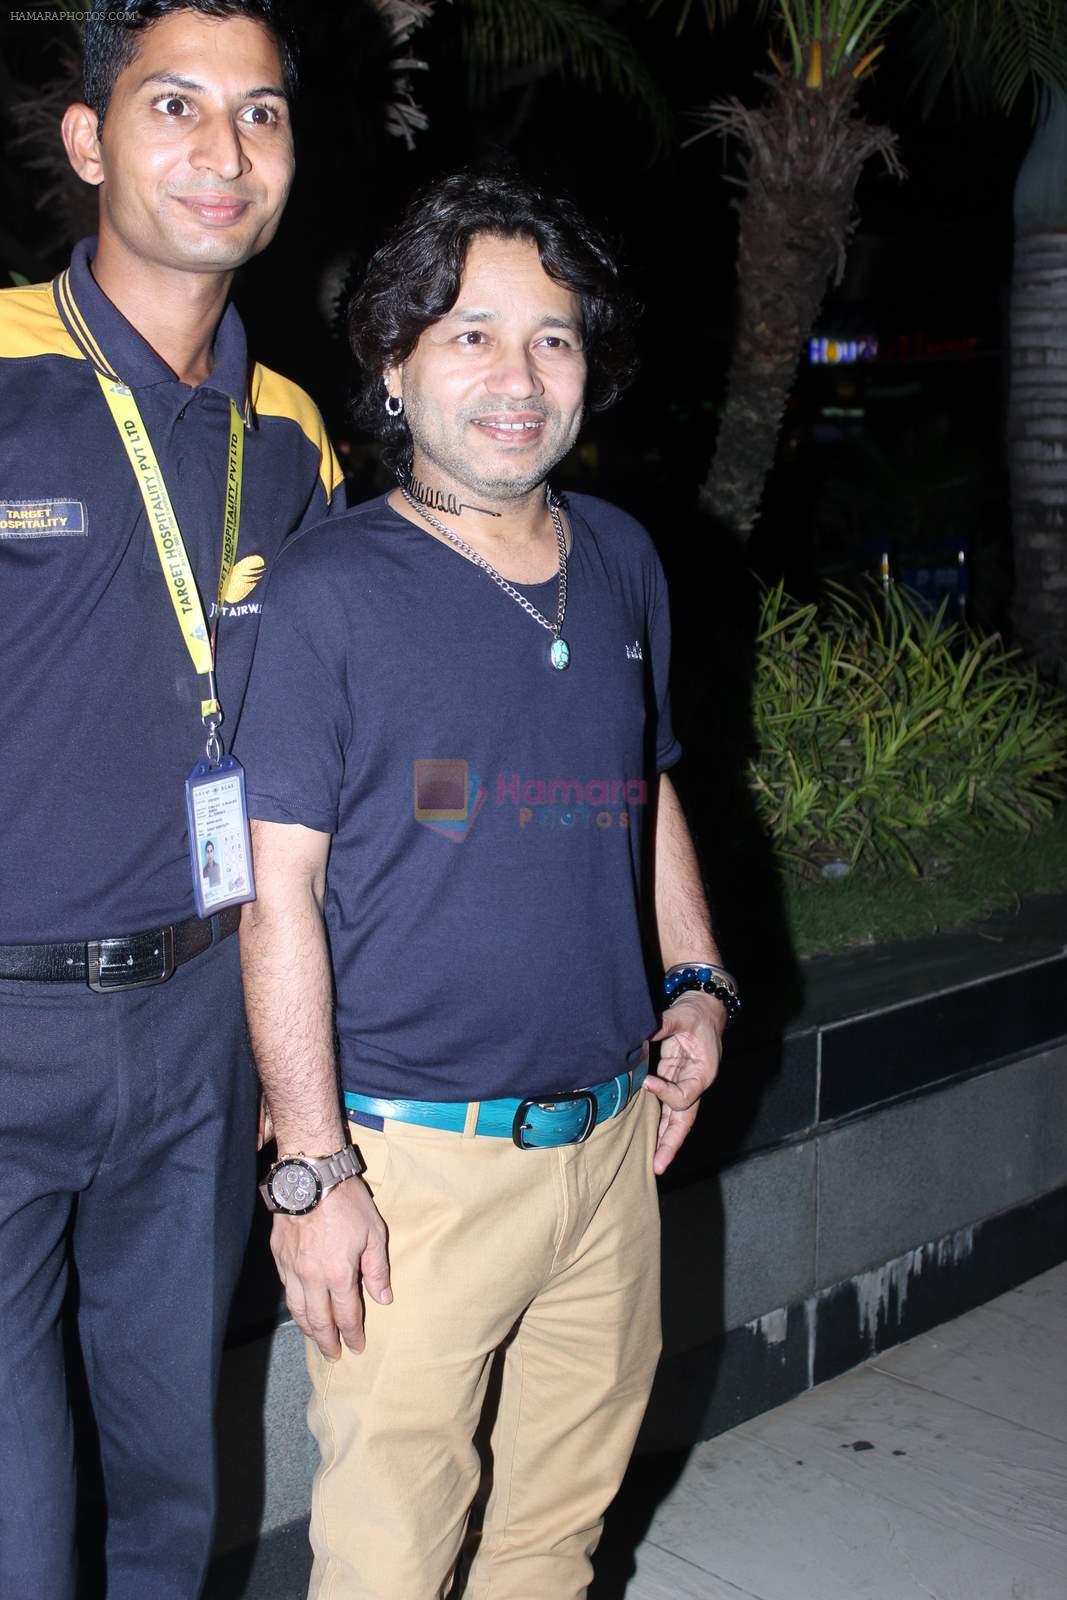 Kailash Kher snapped at airport in Mumbai on 26th June 2015